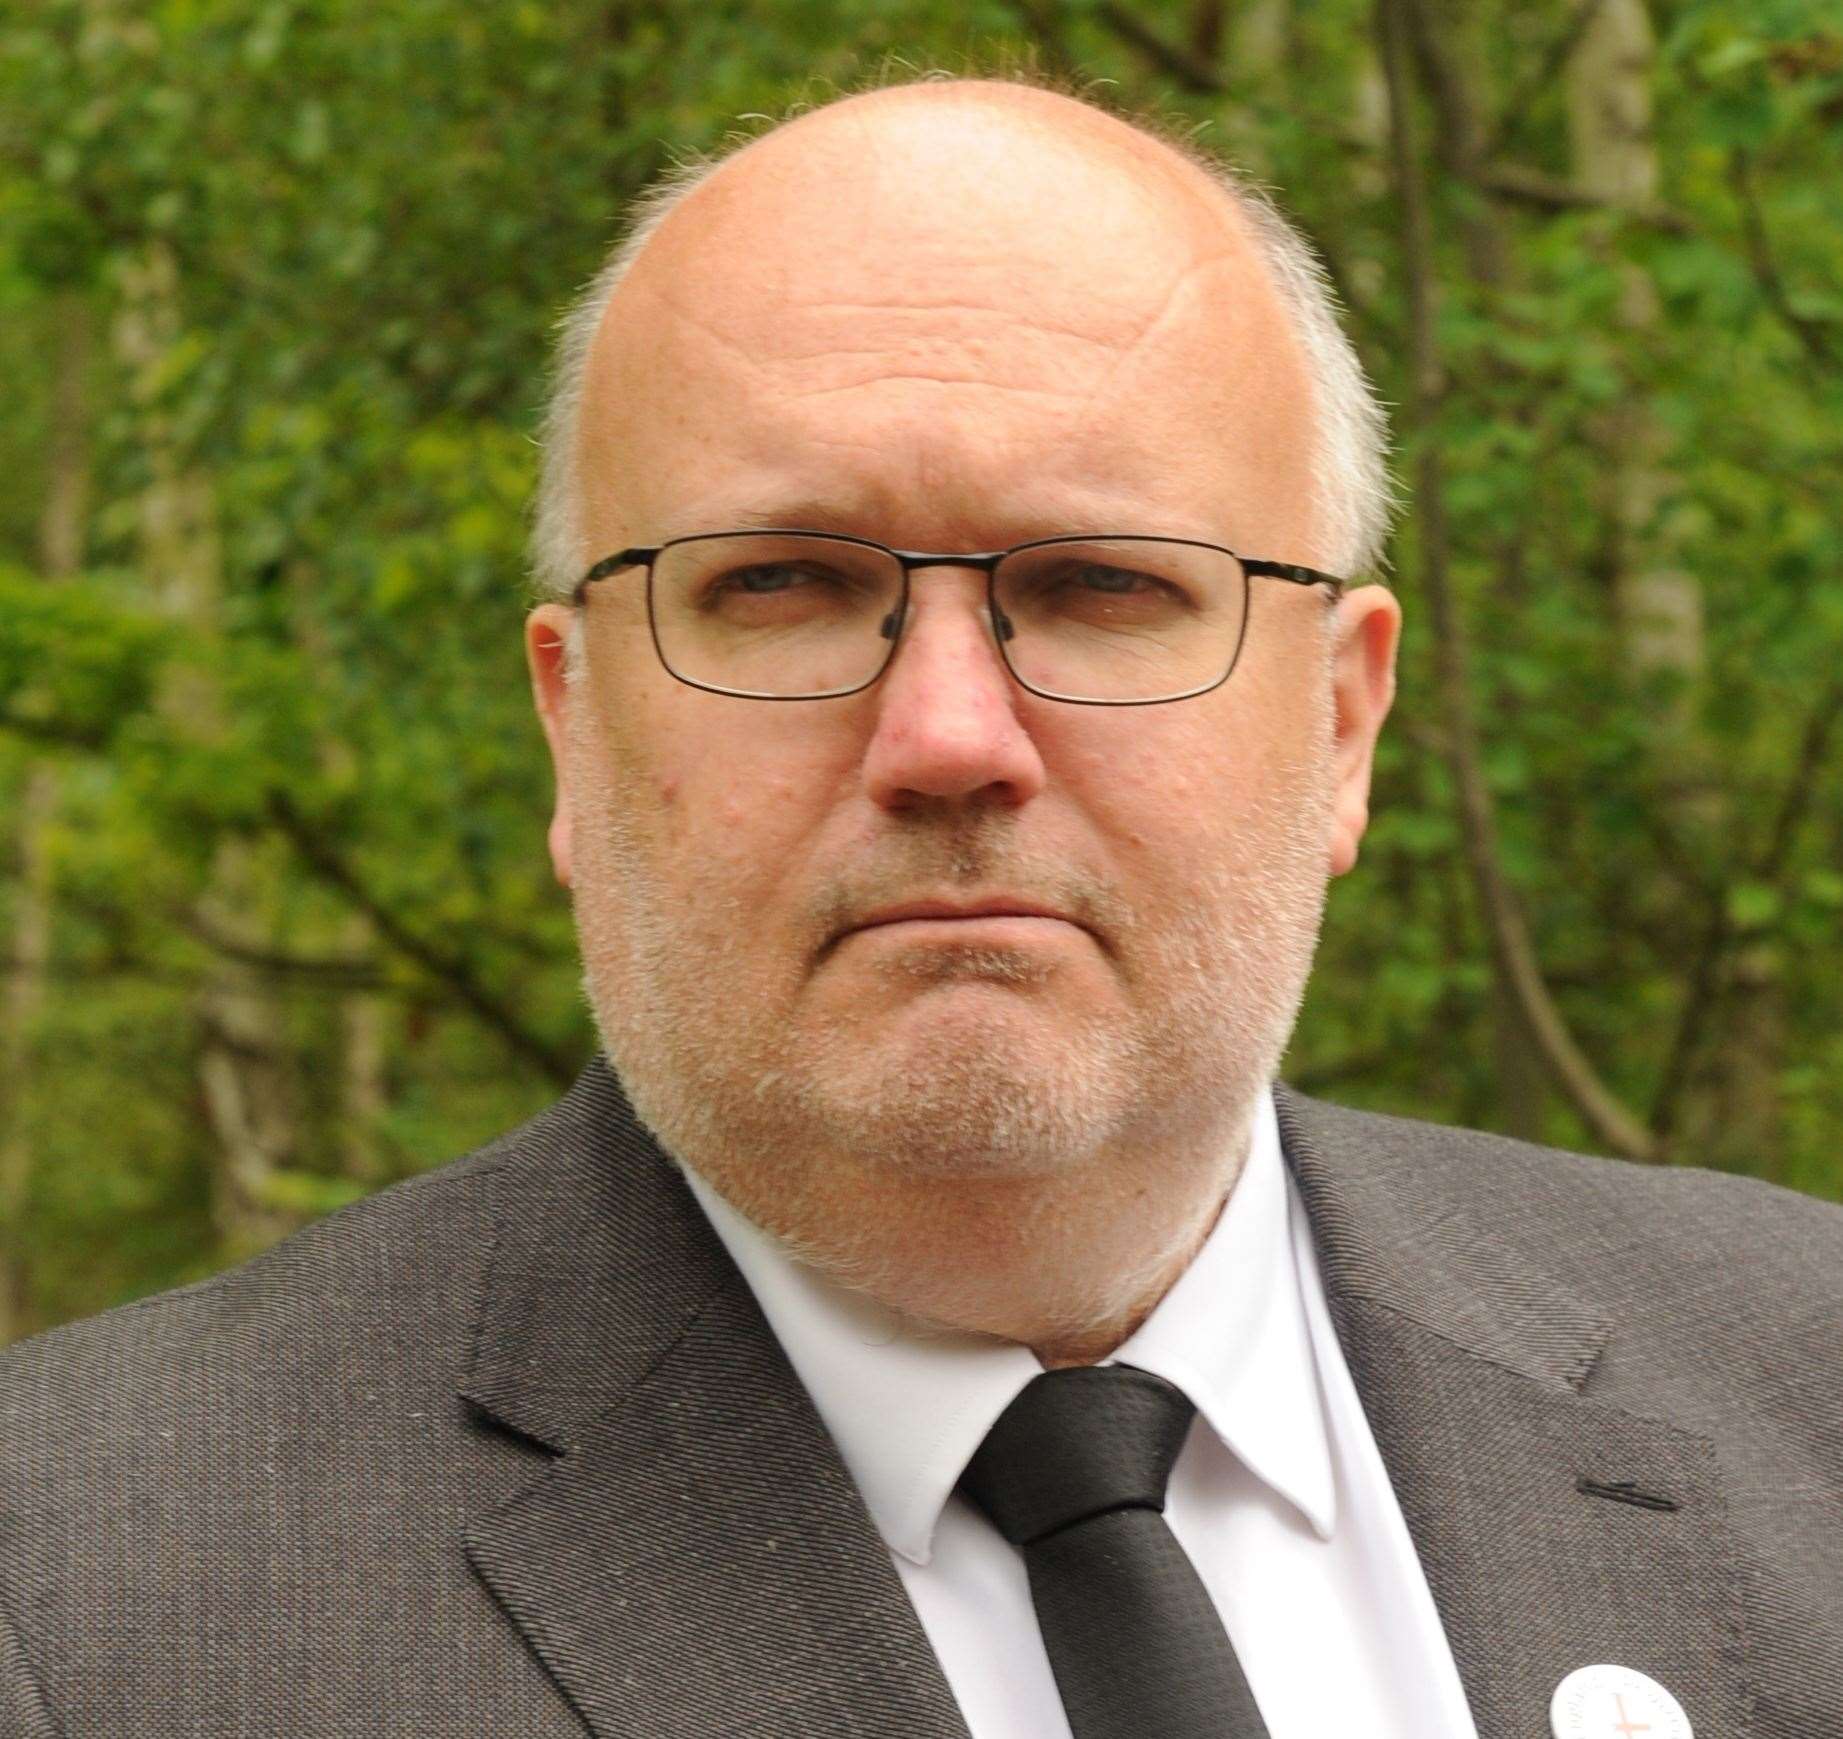 Cllr Jeremy Kite has issued the warning to Dartford residents